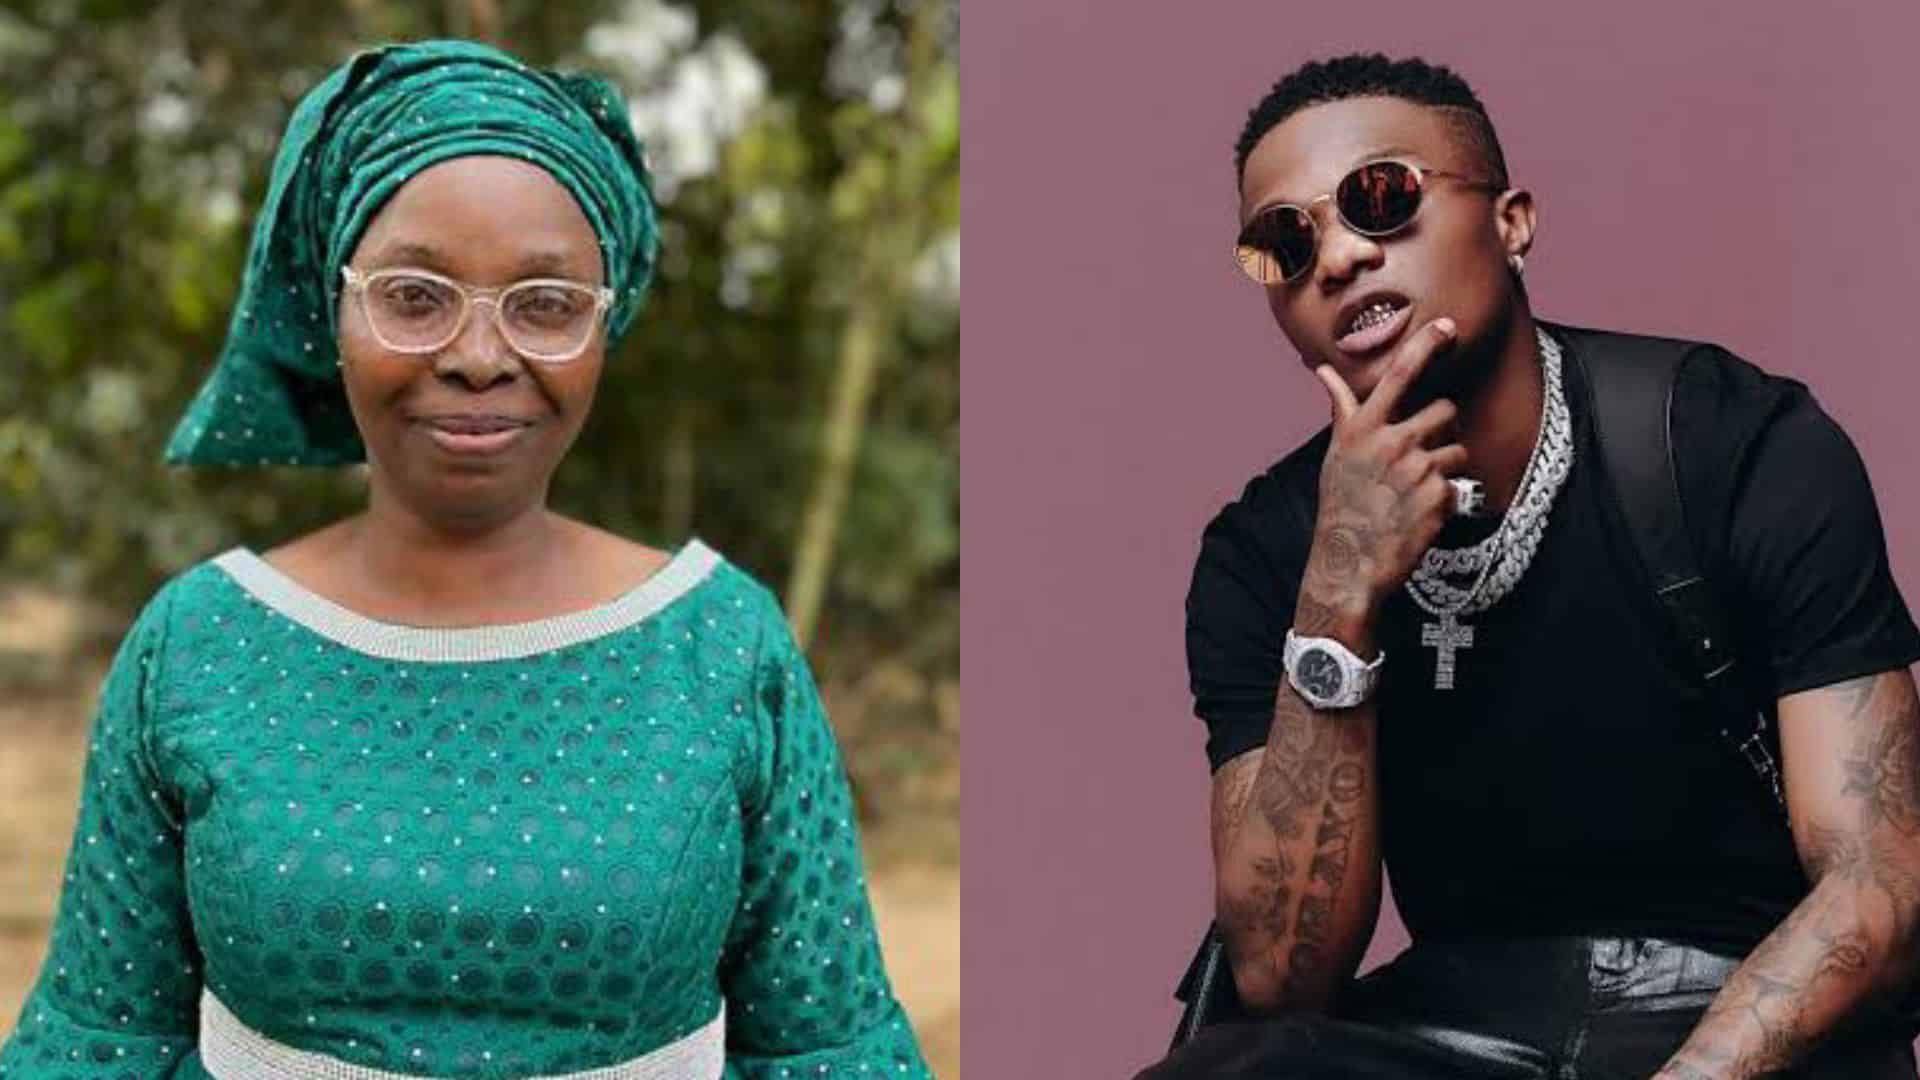 Mummy G.O. slams Wizkid’s fans, says they can’t receive the Holy Spirit (Video) thumbnail